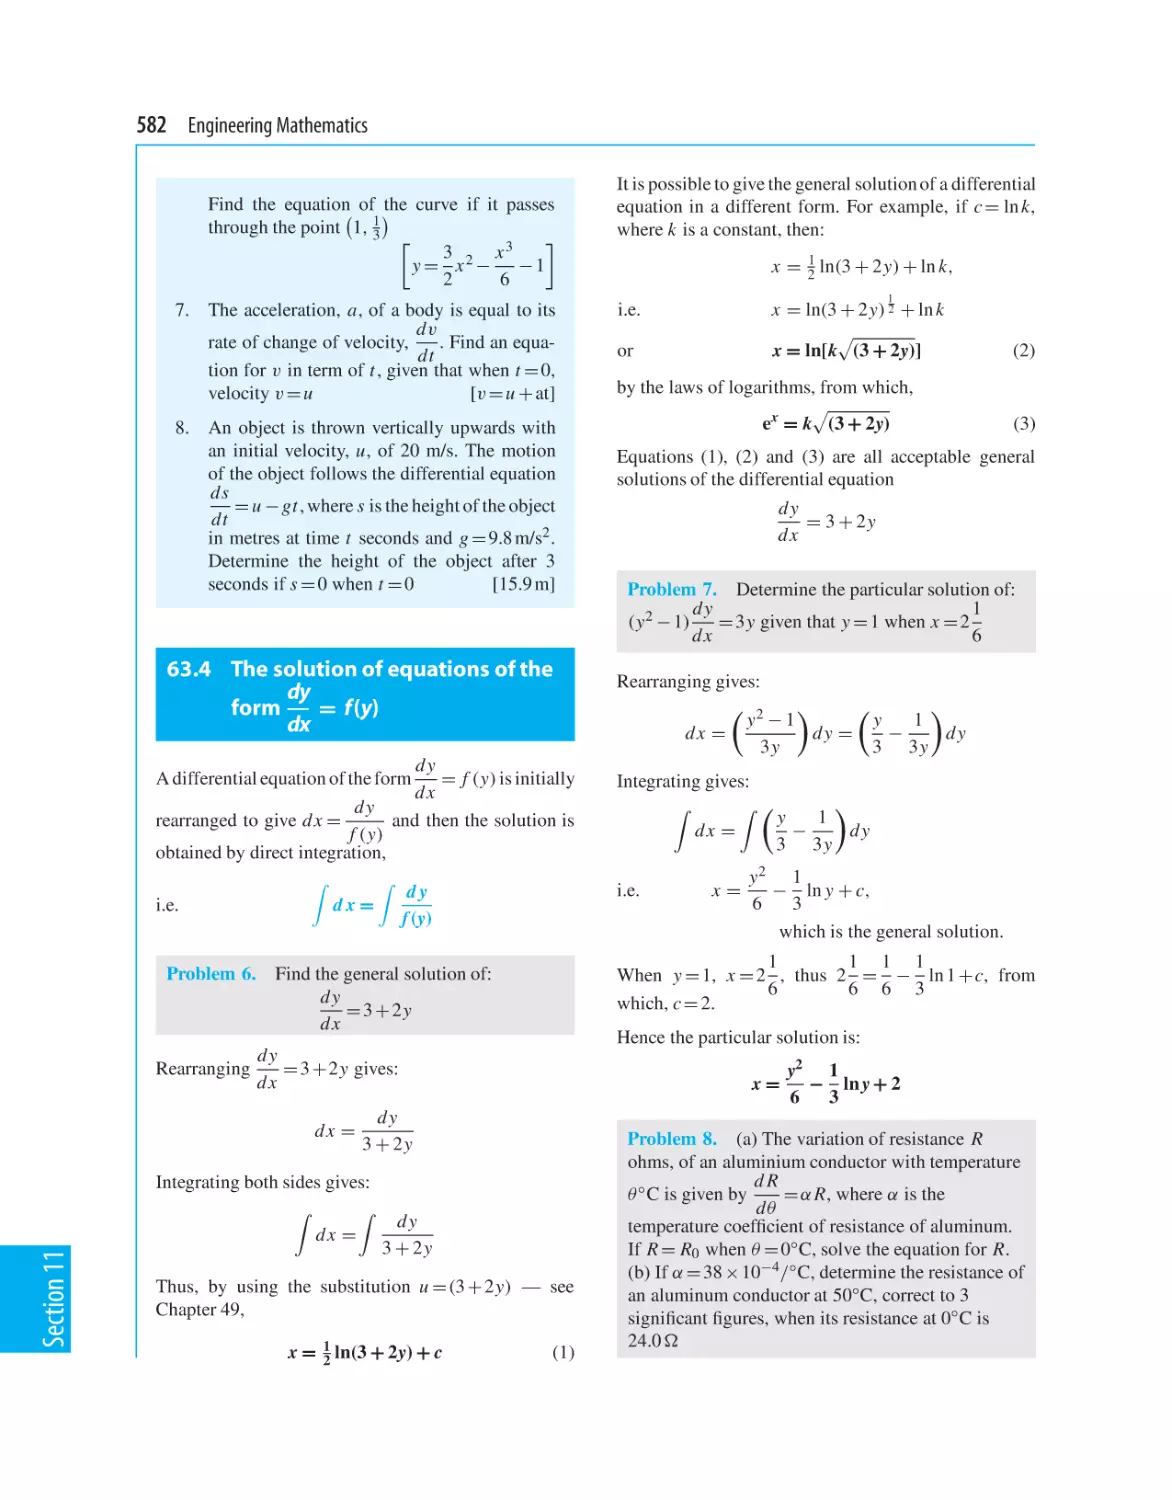 63.4 The solution of equations of the form dy/dx = f(y)